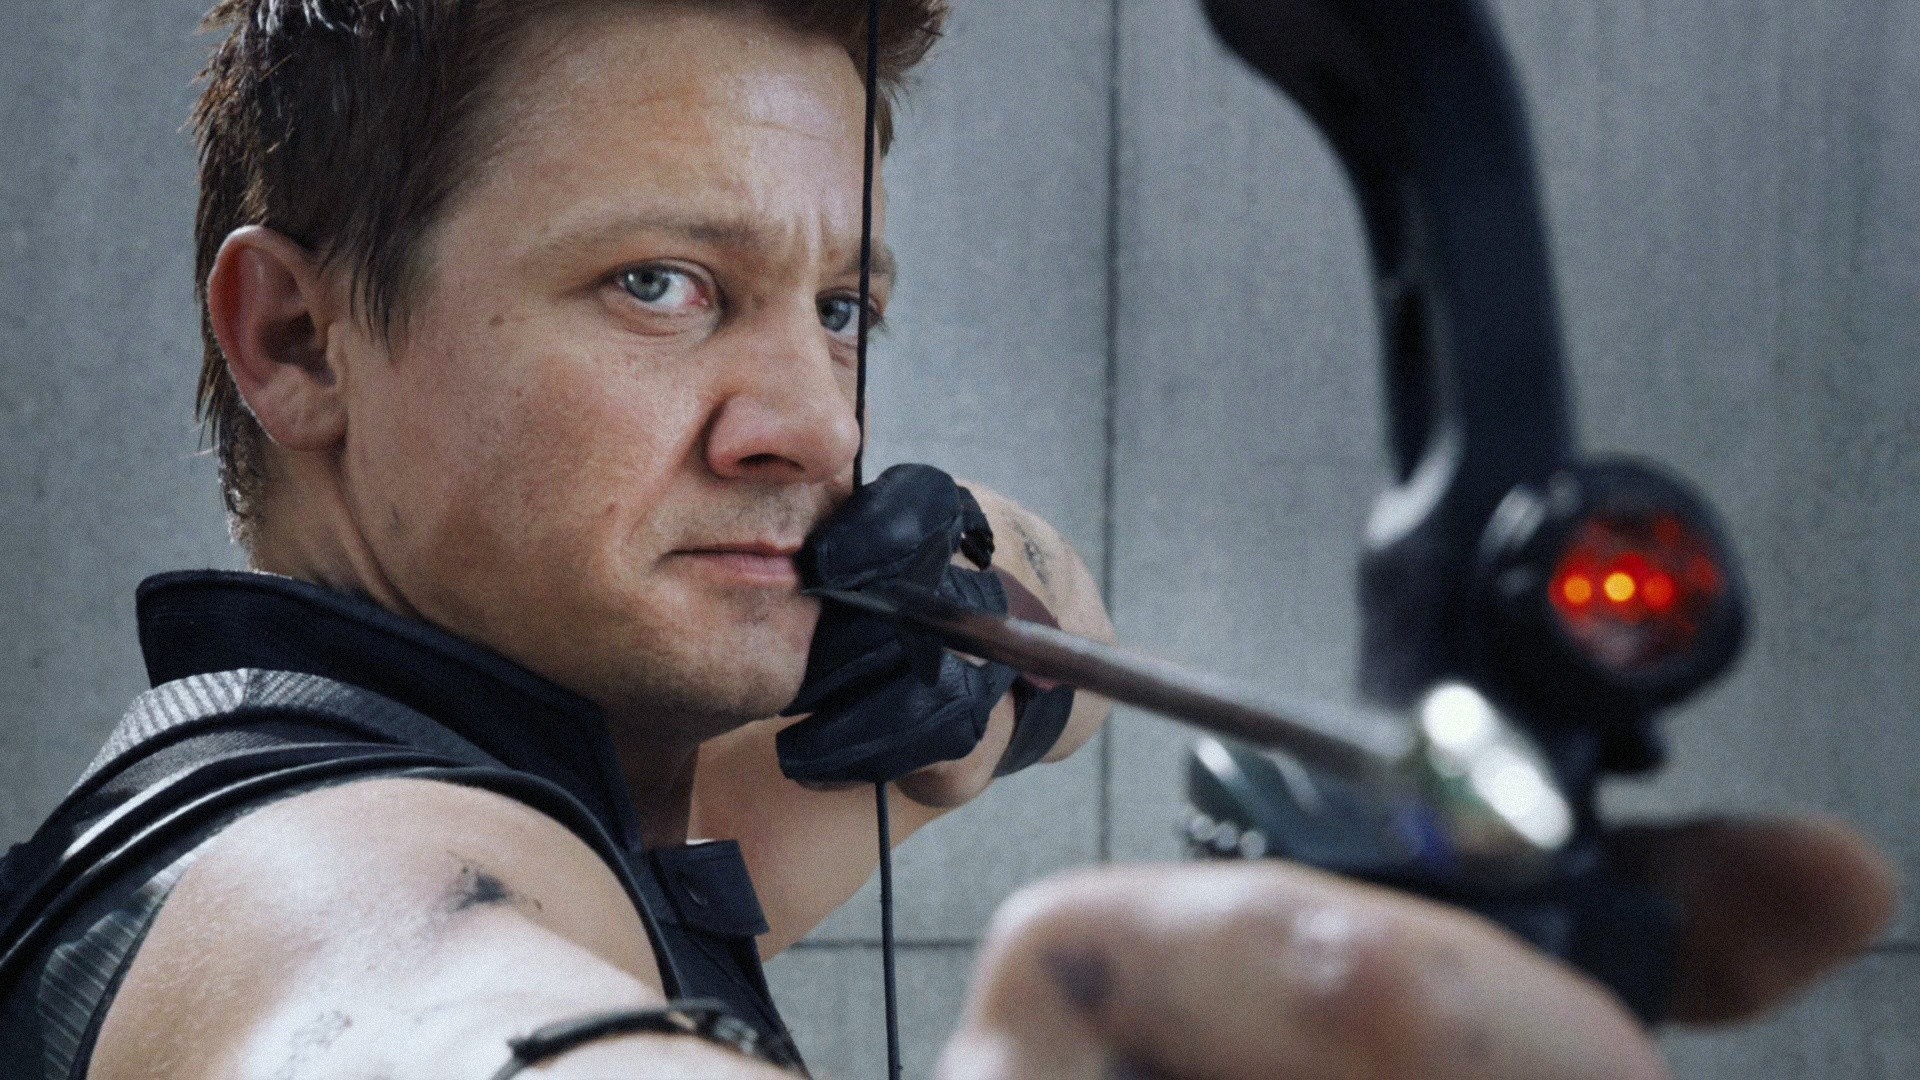 Movies The Avengers Hawkeye Jeremy Renner Clint Barton Marvel Cinematic Universe 1920x1080